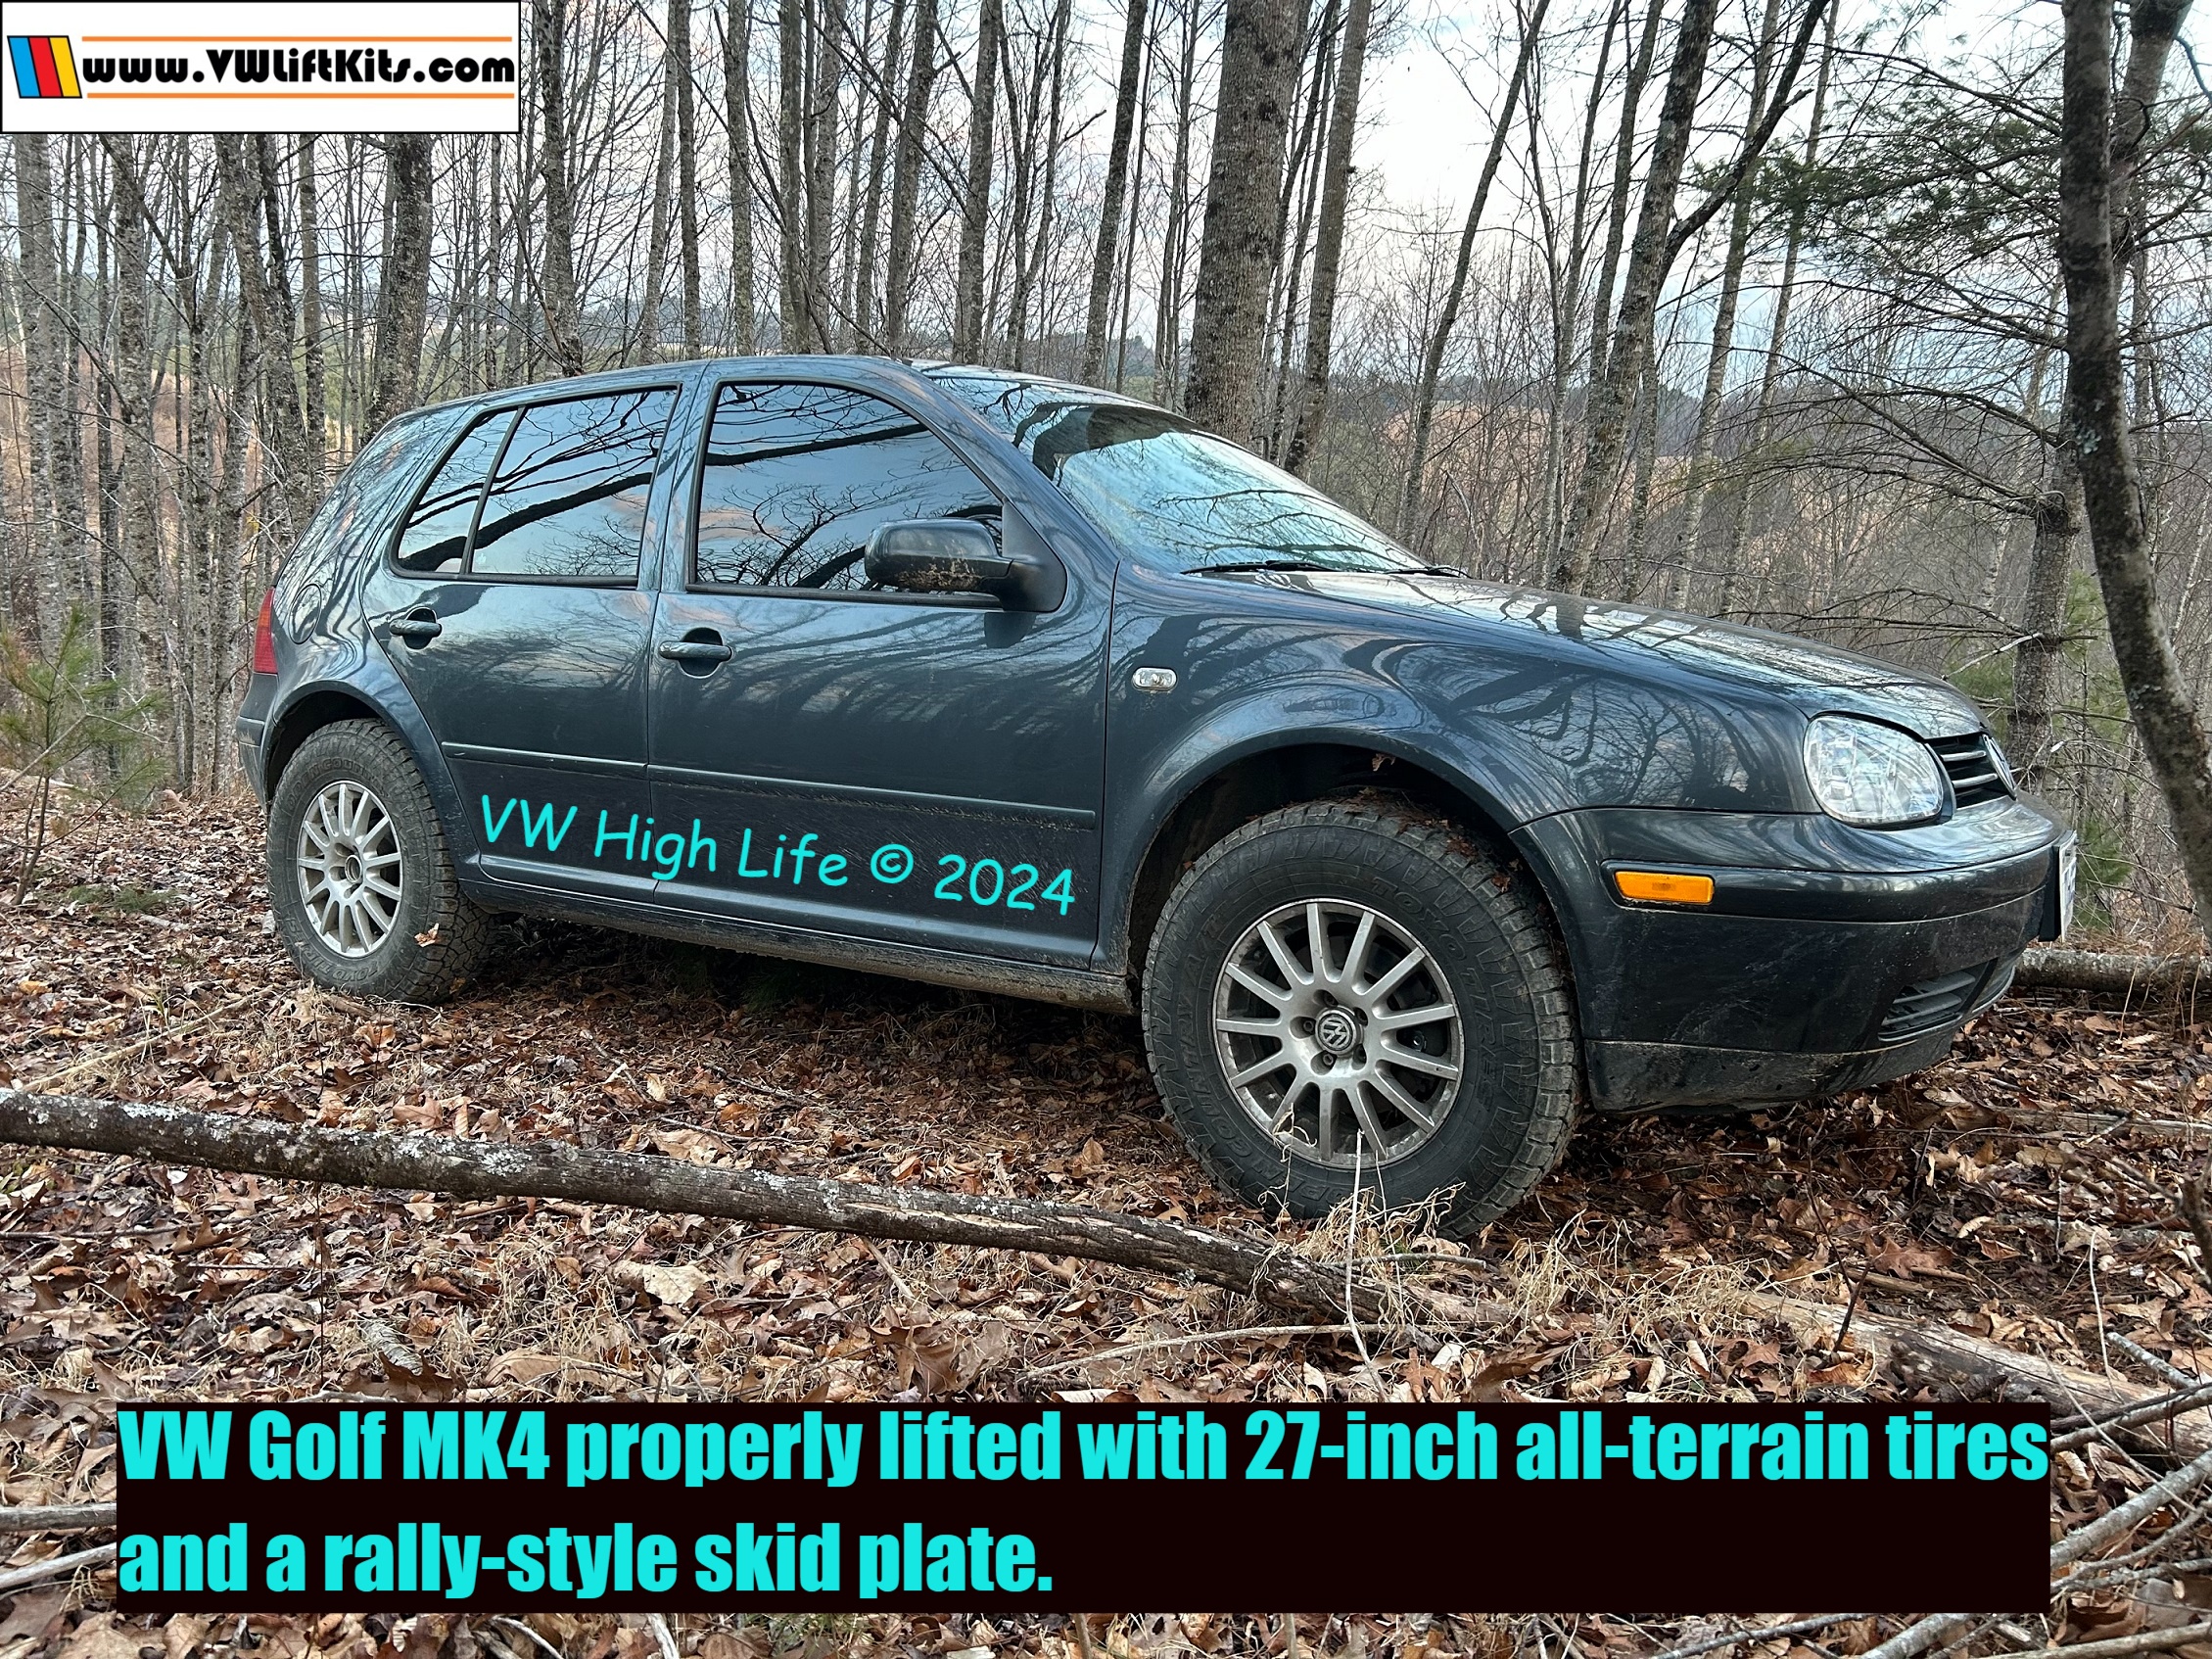 Chris properly lifted his MK4 Golf to make room for some 27-inch all-terrain tires.